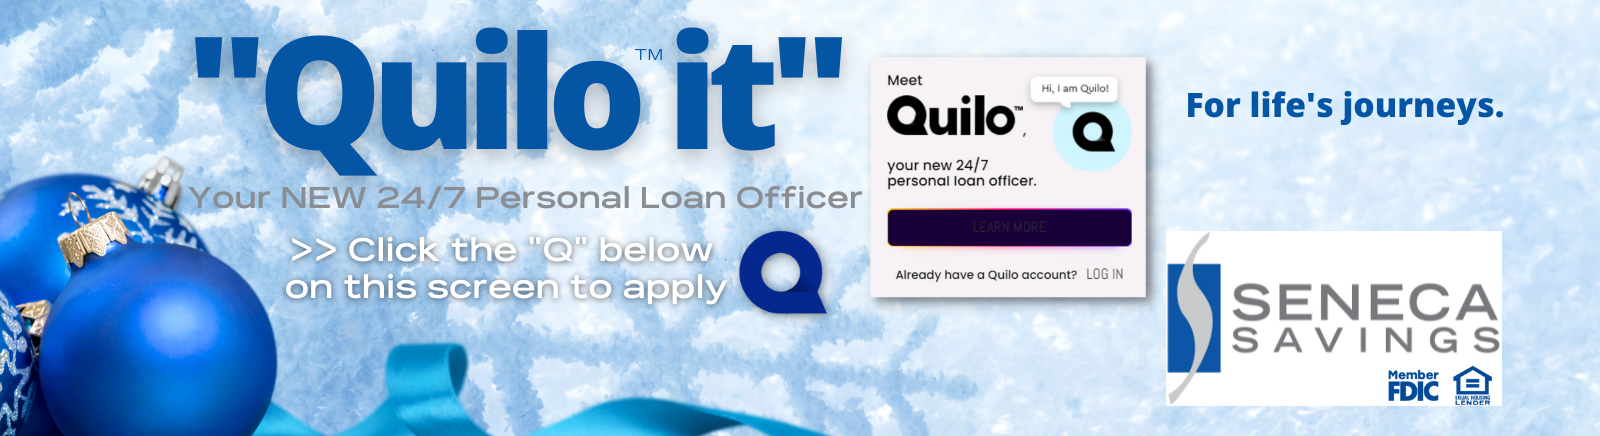 get a quick online personal loan with quilo from seneca savings